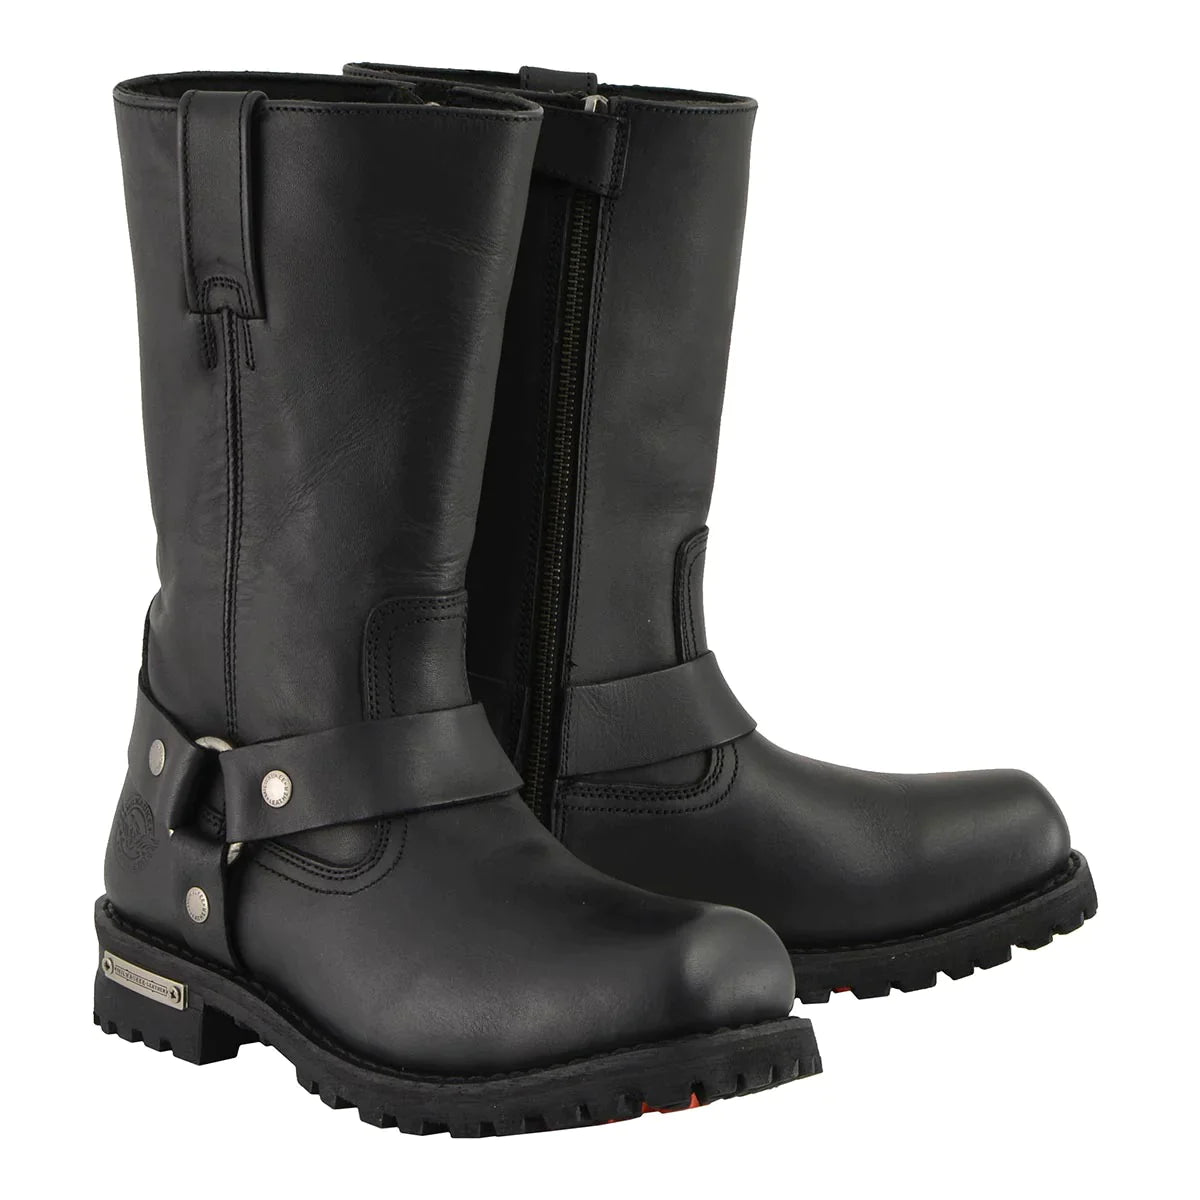 Men's Black 'Wide-Width' 11-inch Classic Square Toe Harness Boots